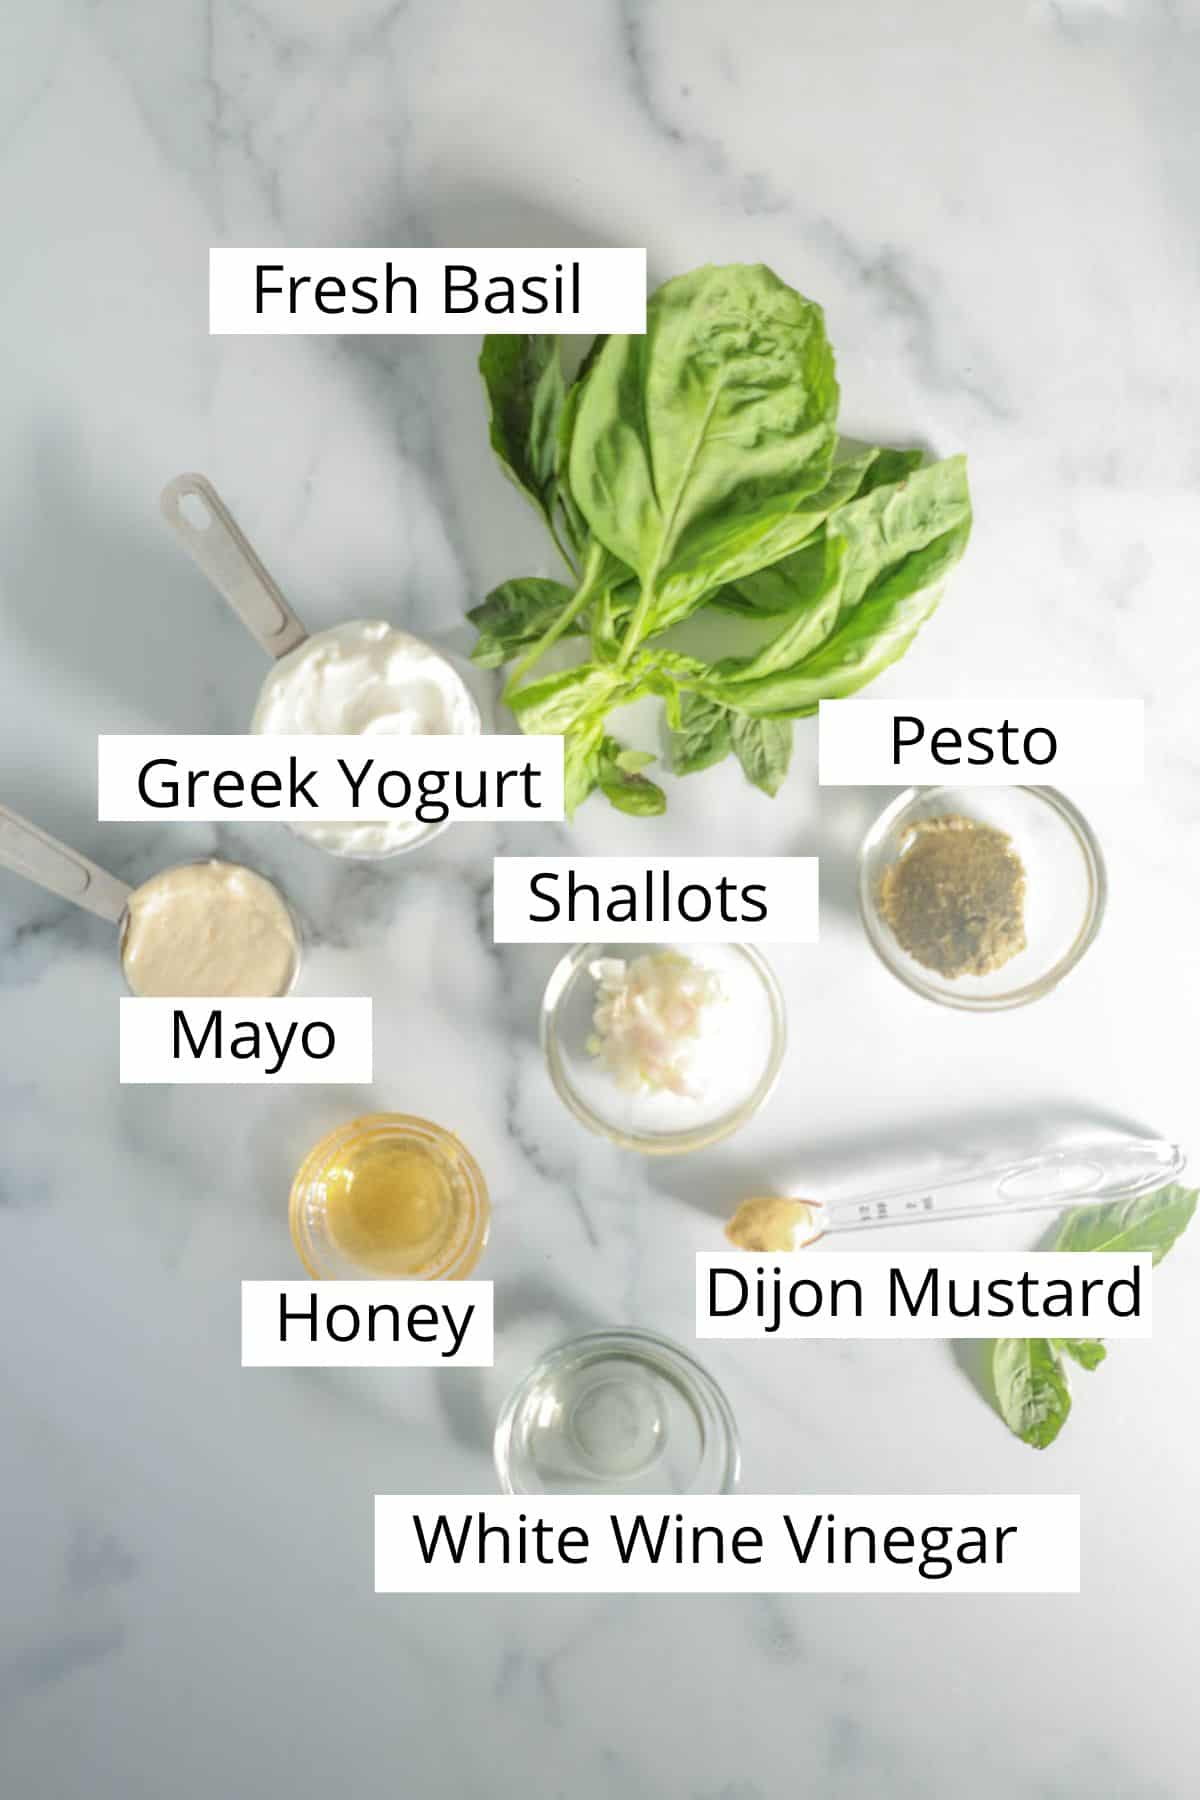 Ingredients for Green Goddess Dressing from Panera.